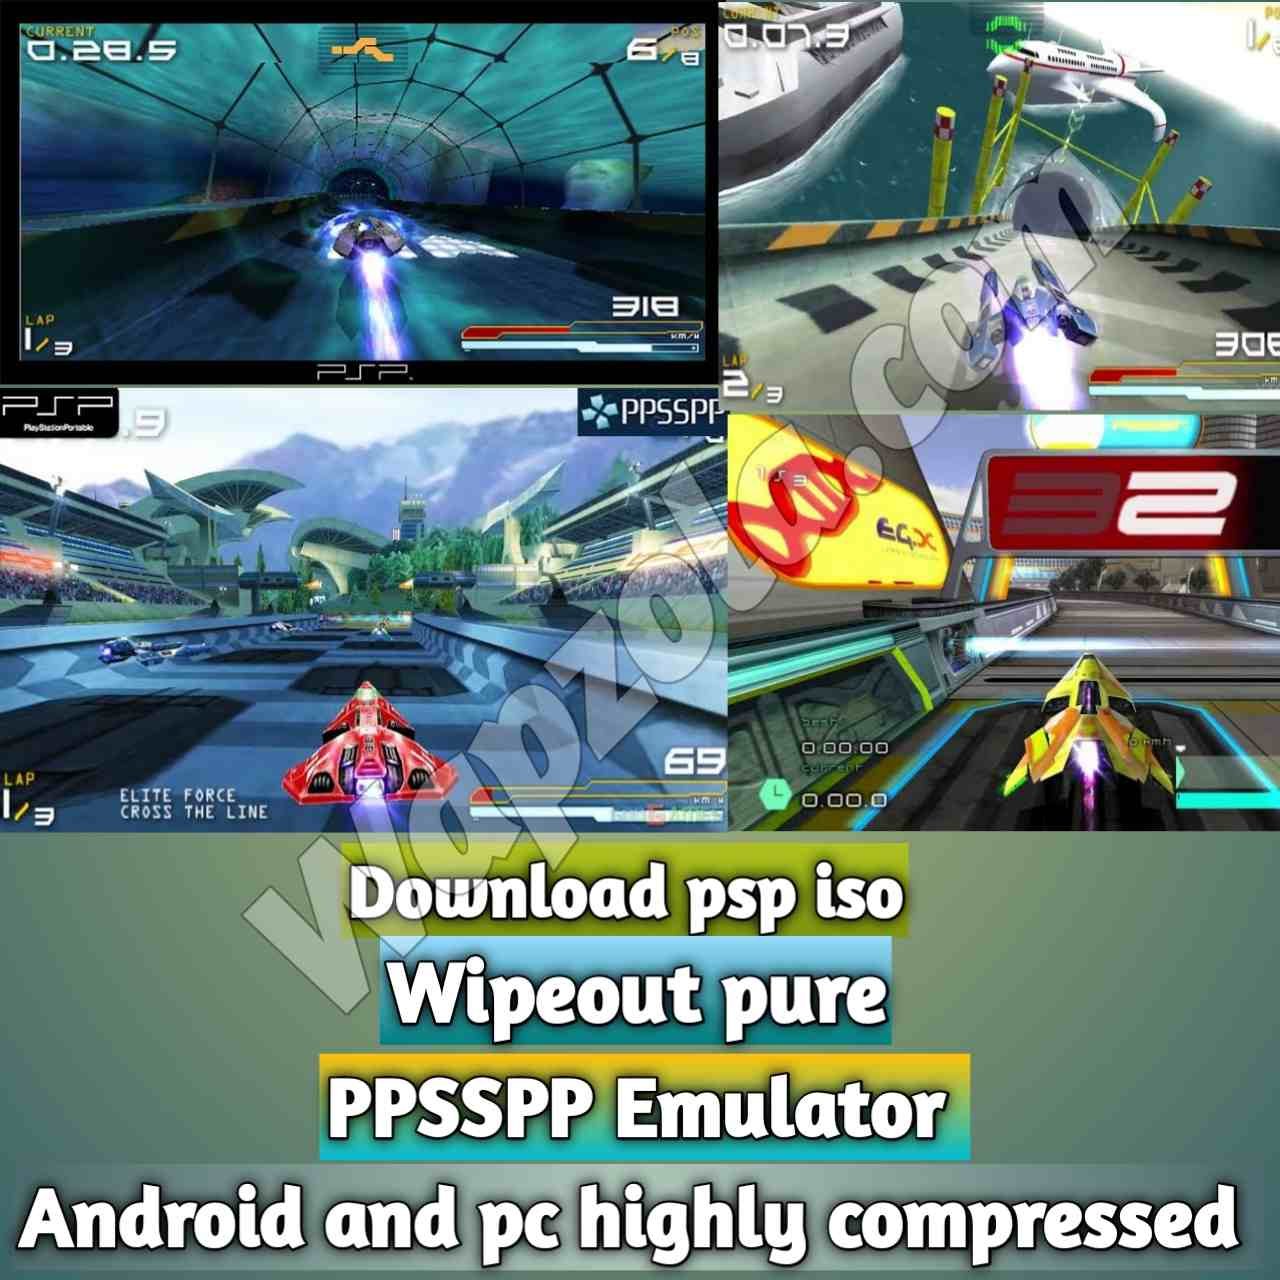 You are currently viewing [Download] Wipeout pure iso ppsspp emulator – PSP APK Iso ROM highly compressed 100MB